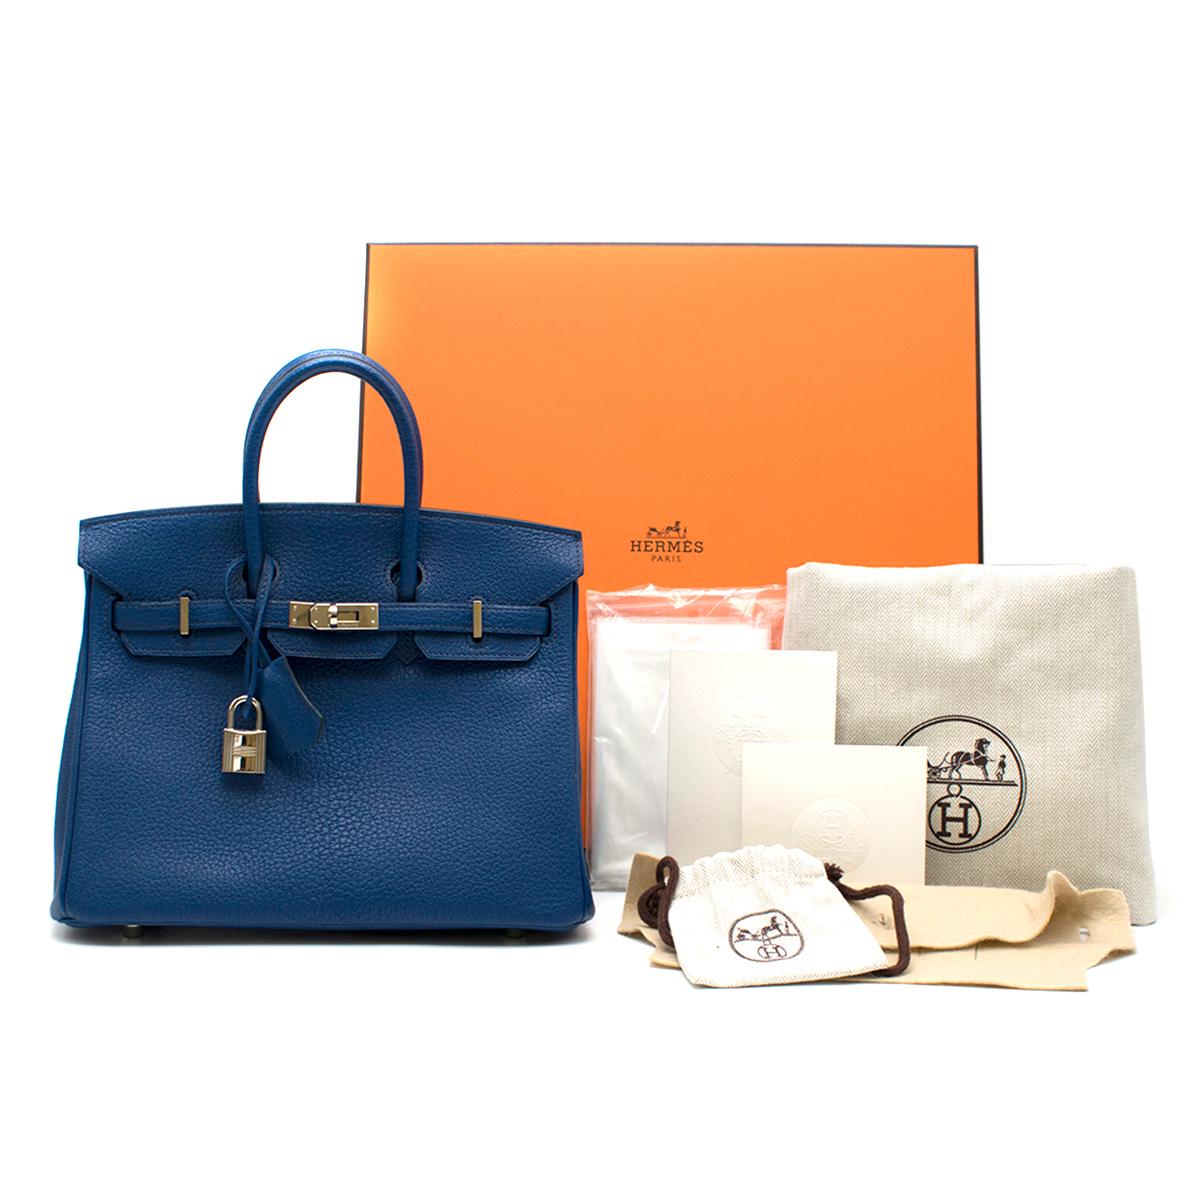 Hermes Thalassa Togo Leather 25cm Birkin Bag

- Serial Number: T
- Age (Circa): 2015
- Thalassa: Mediterranean Sea Blue, deeper than Blue Jean
- Togo leather 
- Two rolled leather top handles
- Black lacquered edges, signature palladium plated